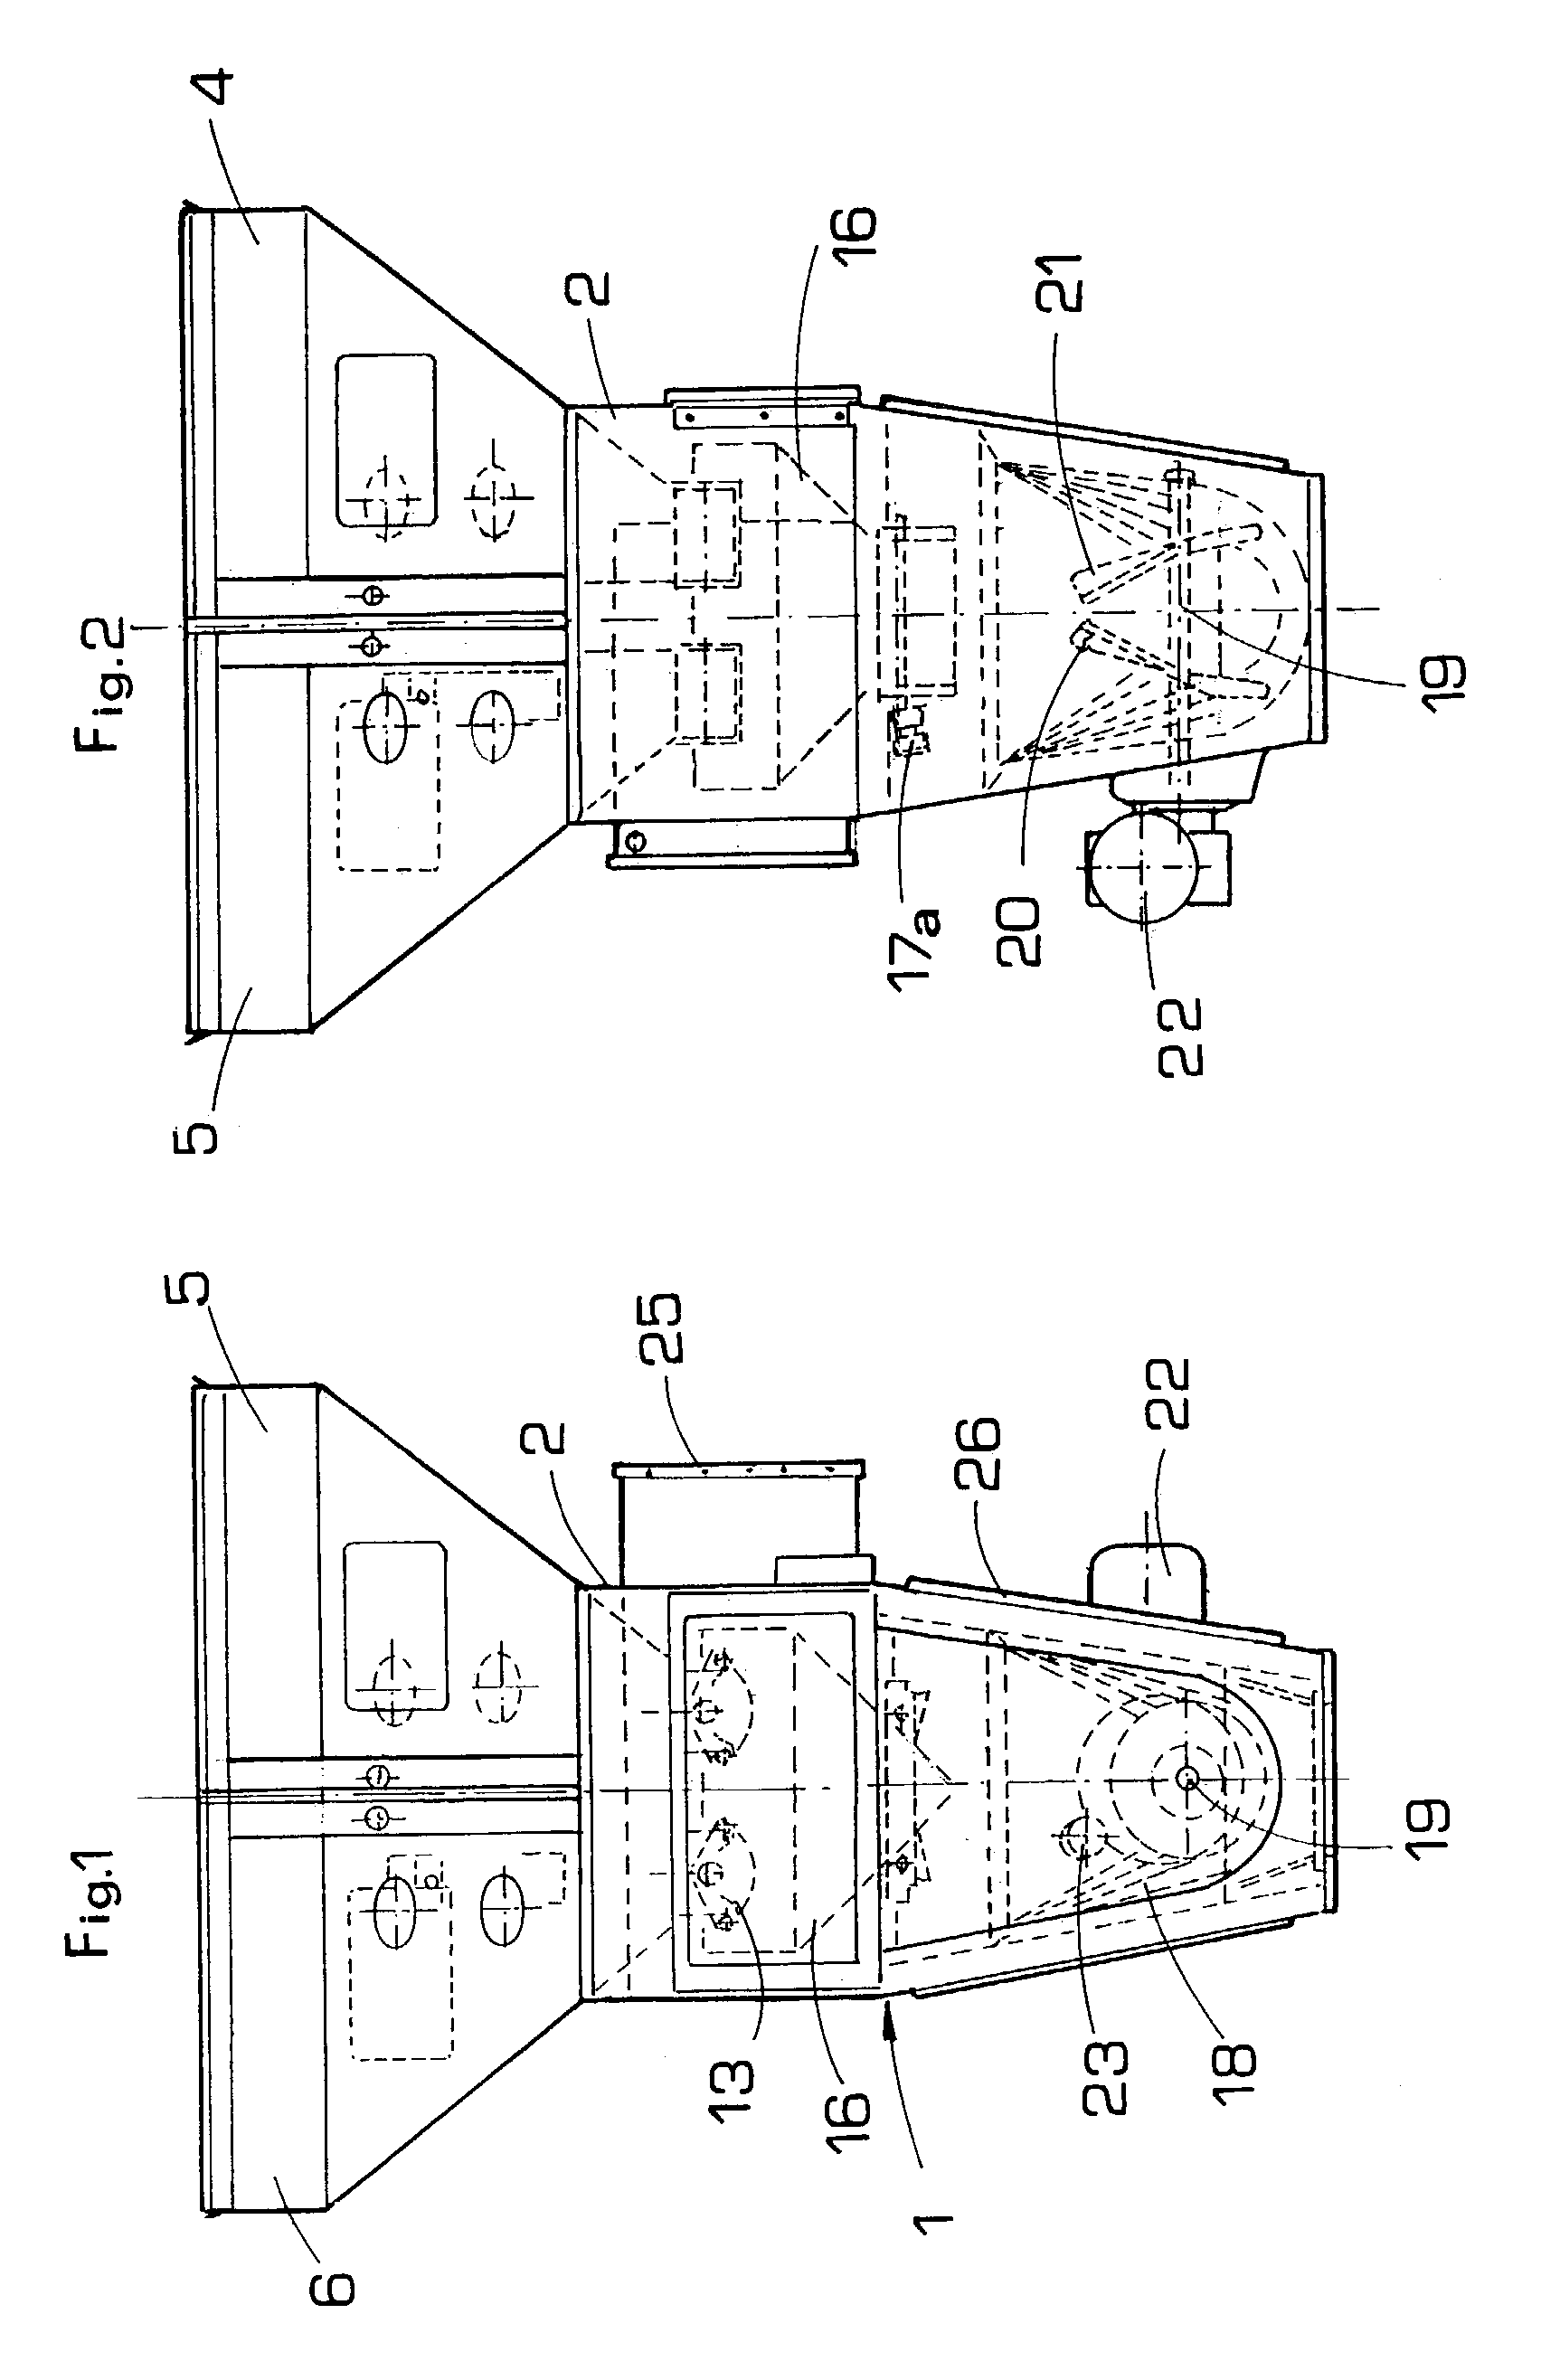 Gravimetric dosing and mixing apparatus for a plurality granular products